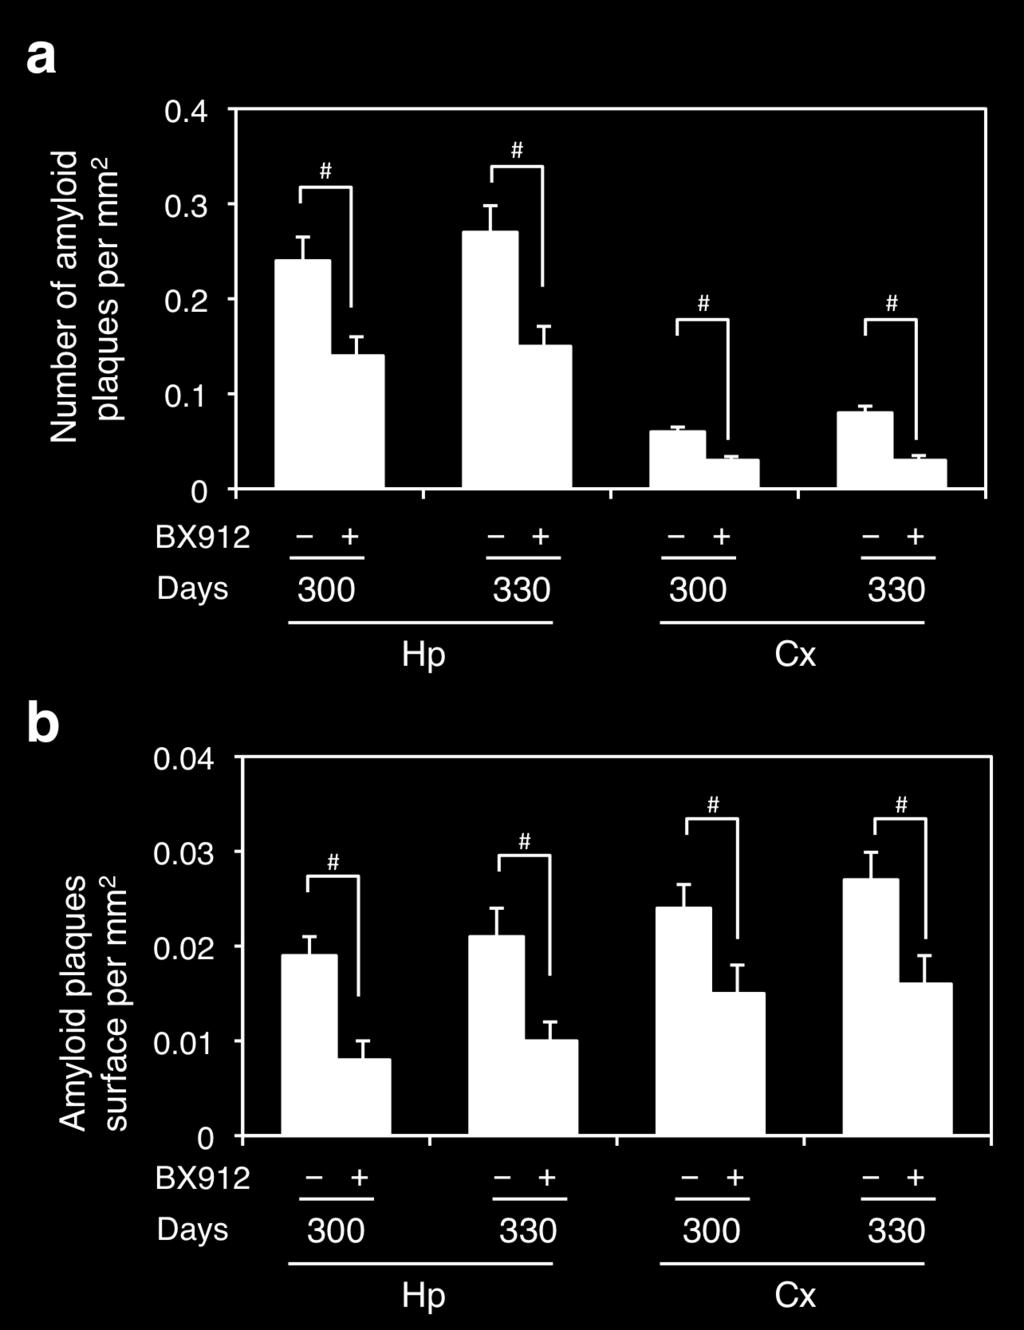 pos mice) to 10/100 vs. 23/100 at 300 days and to 12/100 vs. 34/100 at 330 days as compared to untreated mice. As observed at 275 days (Fig. 6a), each of these BX912-treated TgA!